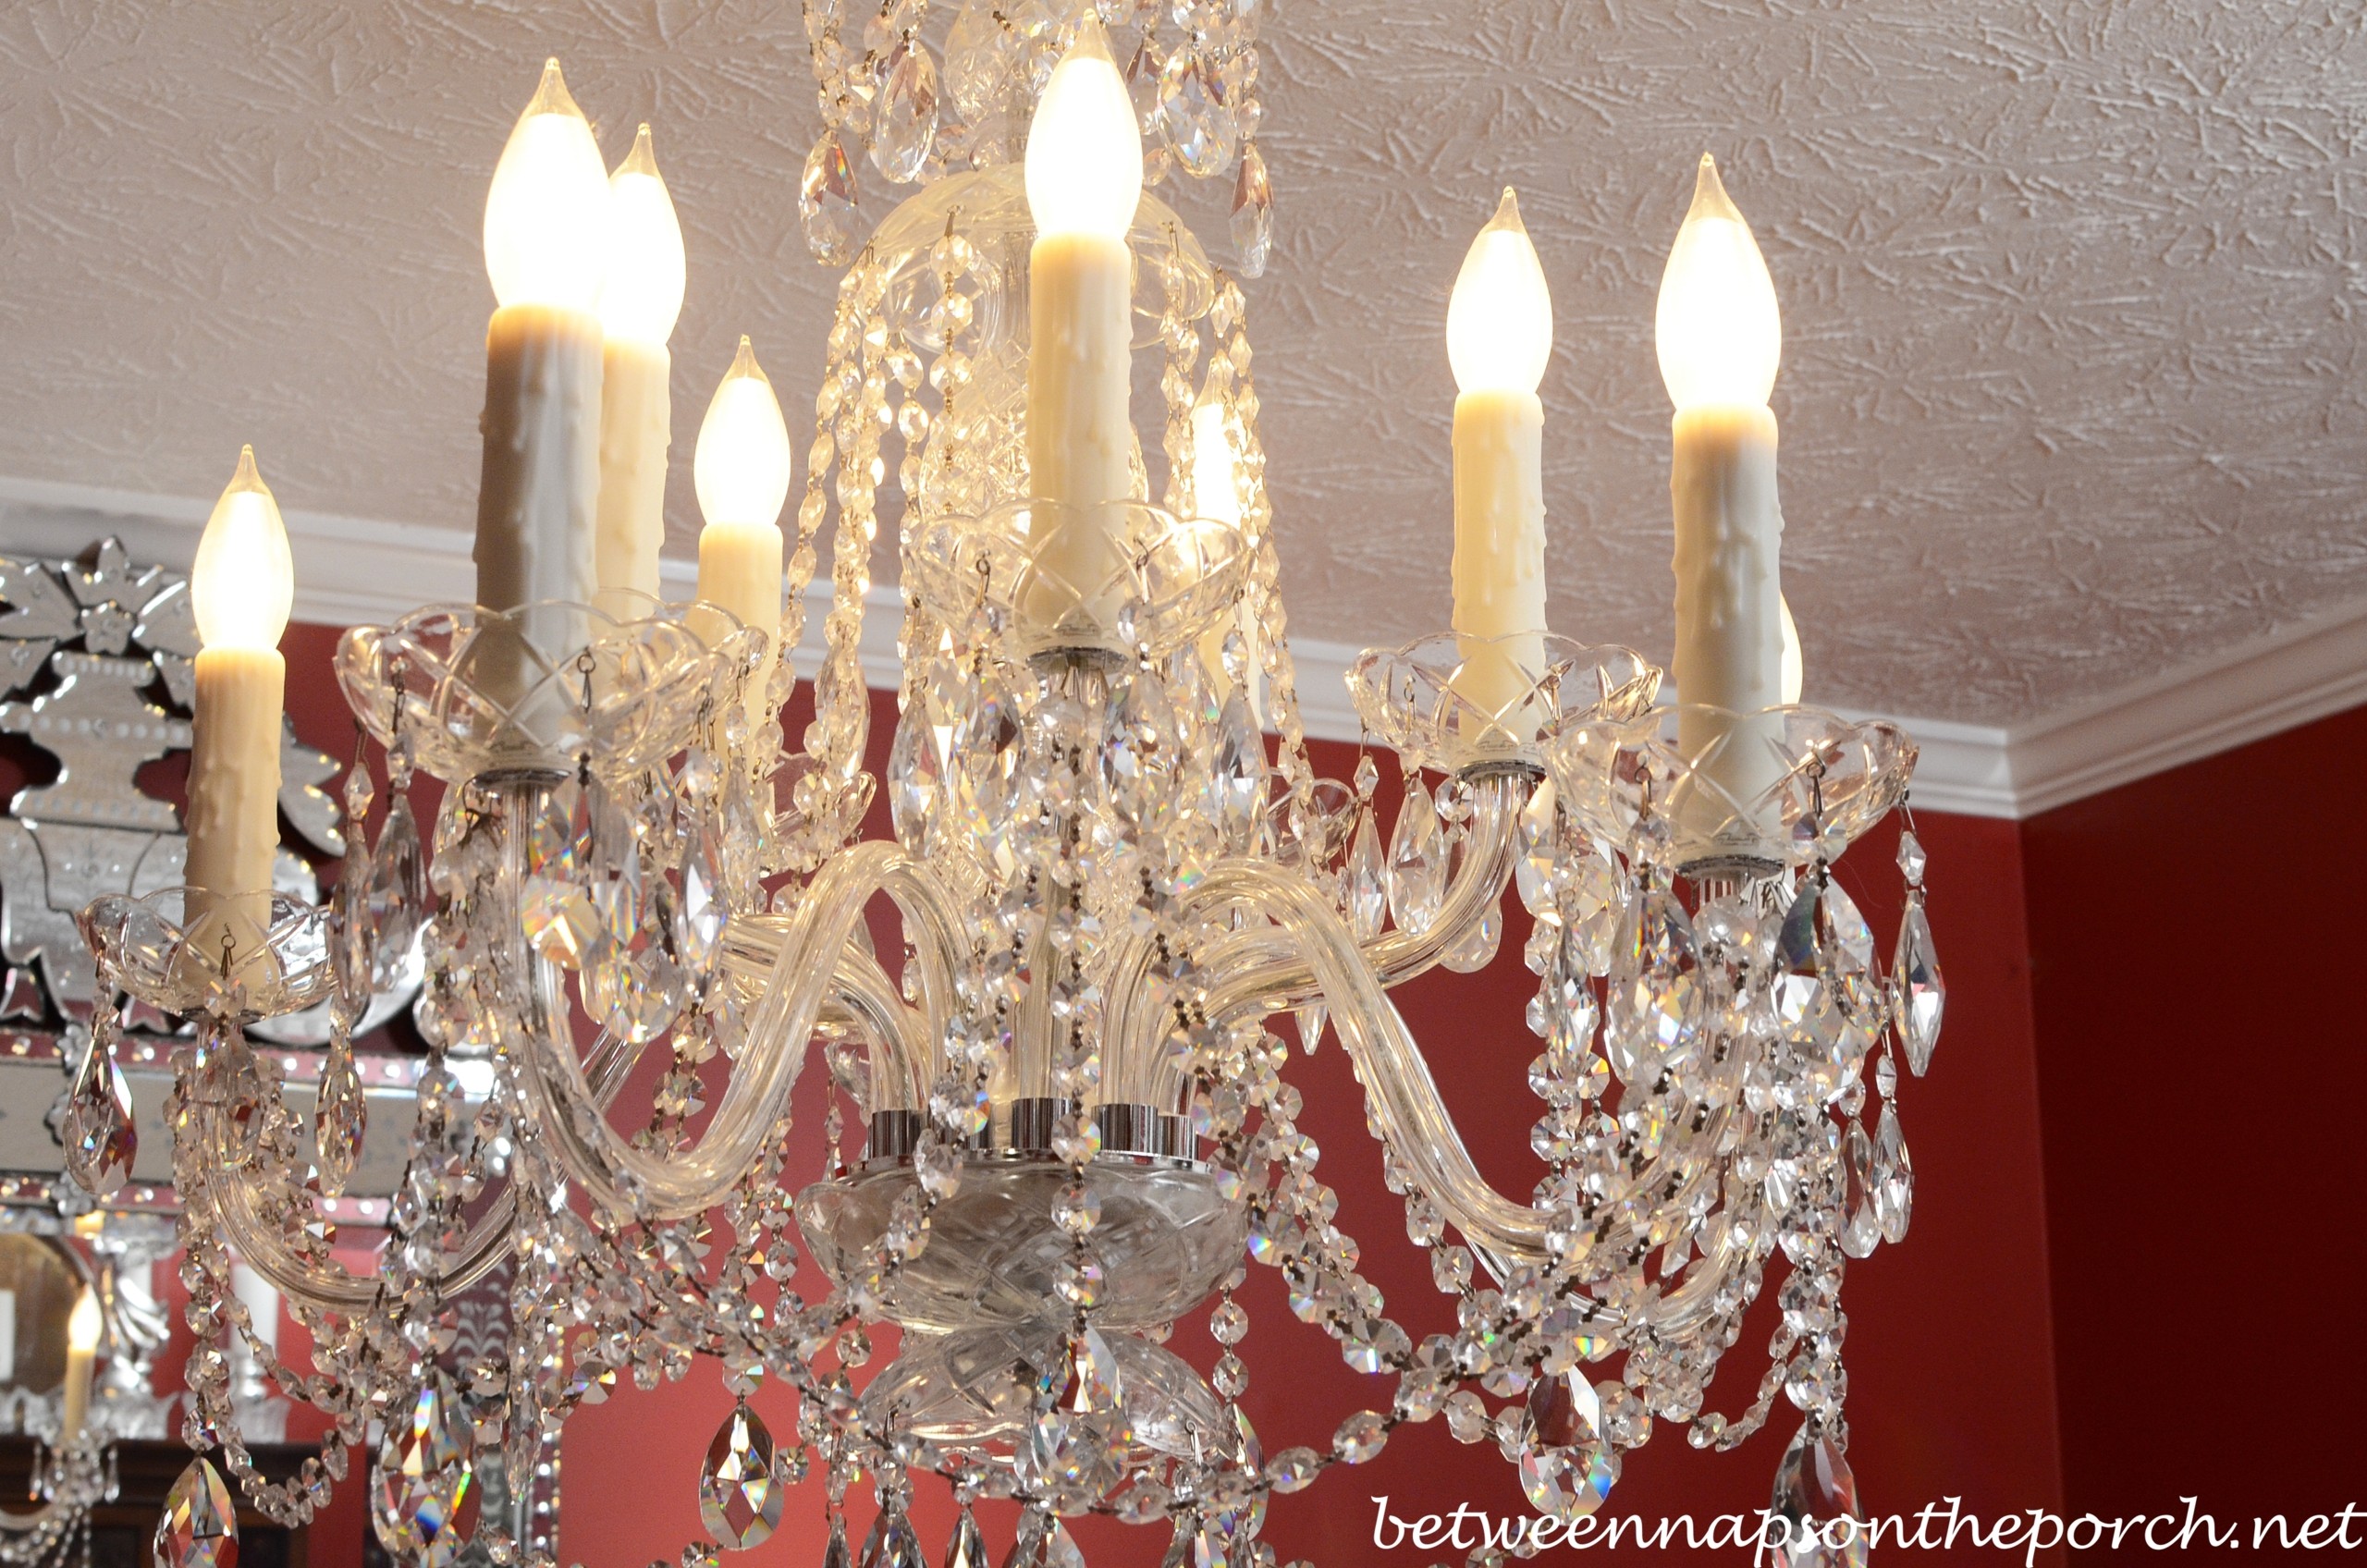 Transform an ordinary chandelier with resin candle covers